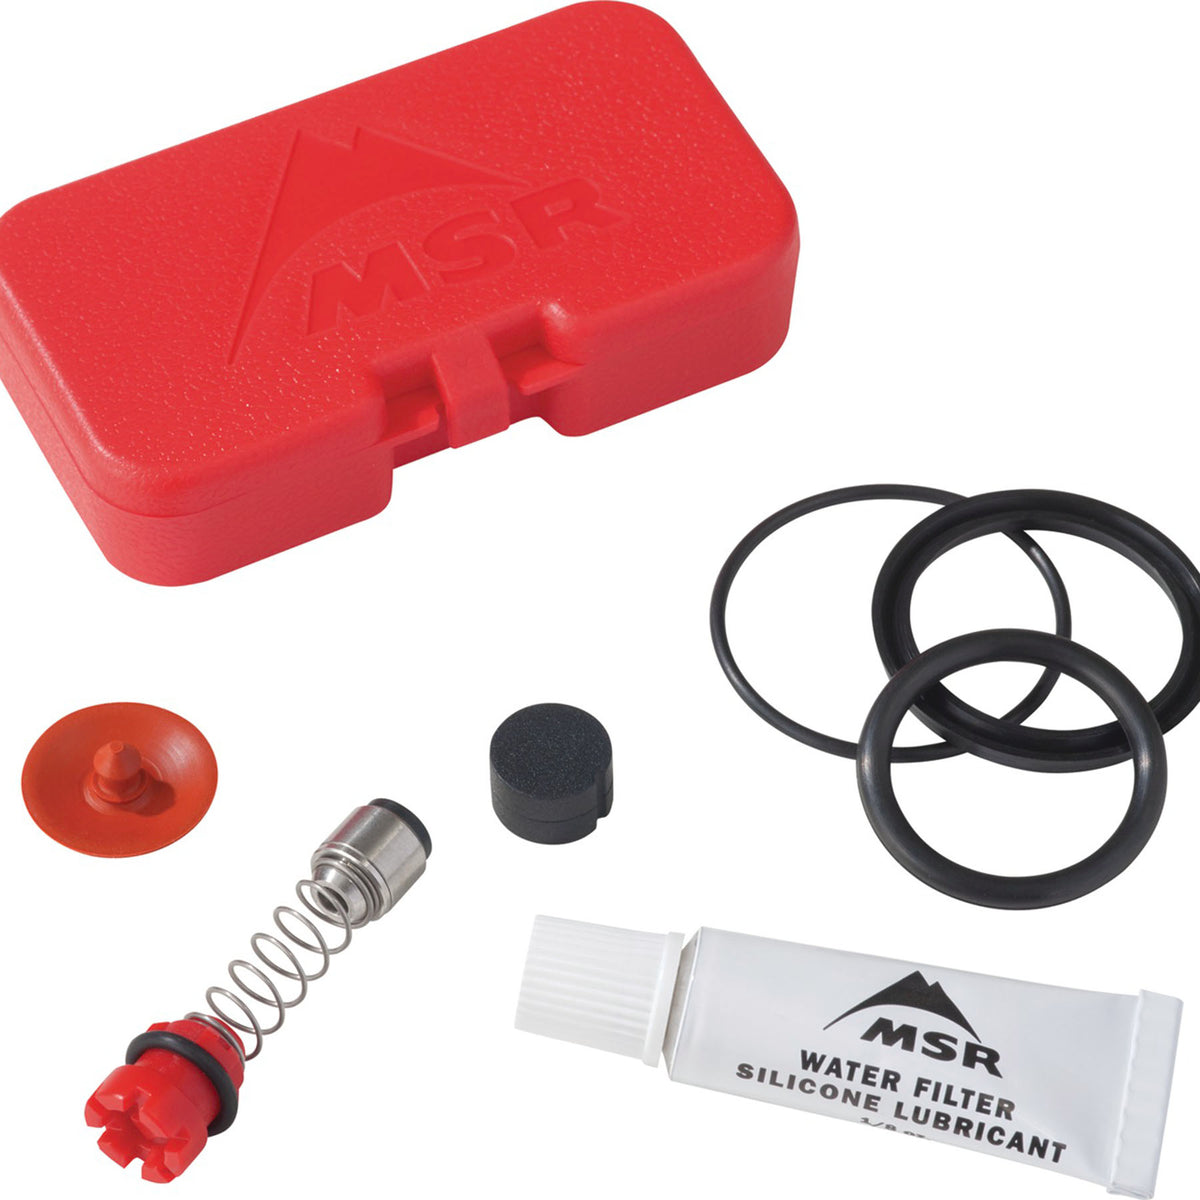 guardian purifier annual maintenance kit, showing all the component parts